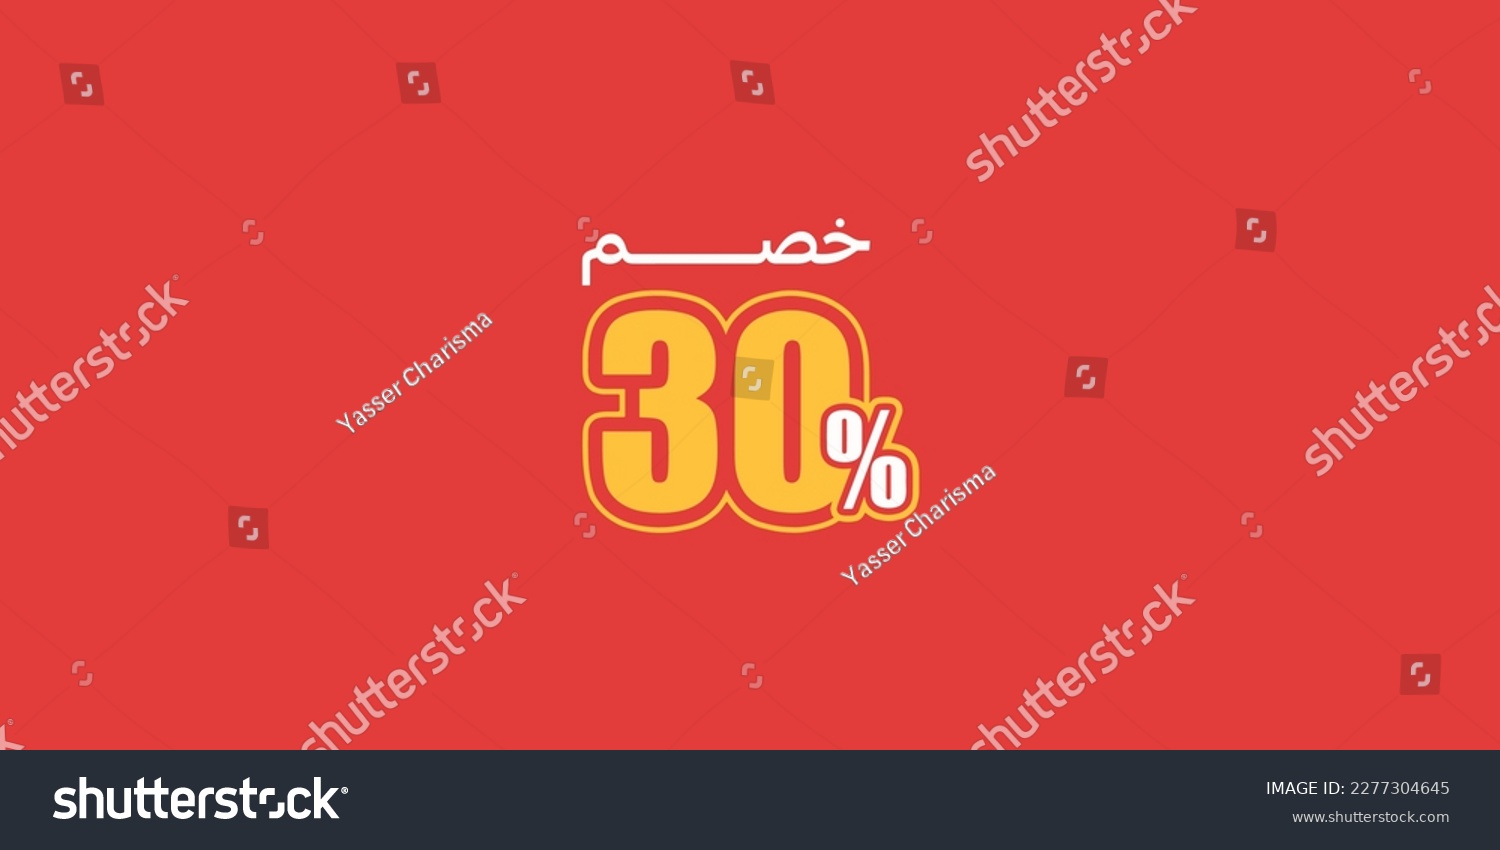 SVG of Sale off discount promotion set made of  numbers . Vector Illustration of  30% percent discount arabic for your unique selling poster, banner ads.
 svg